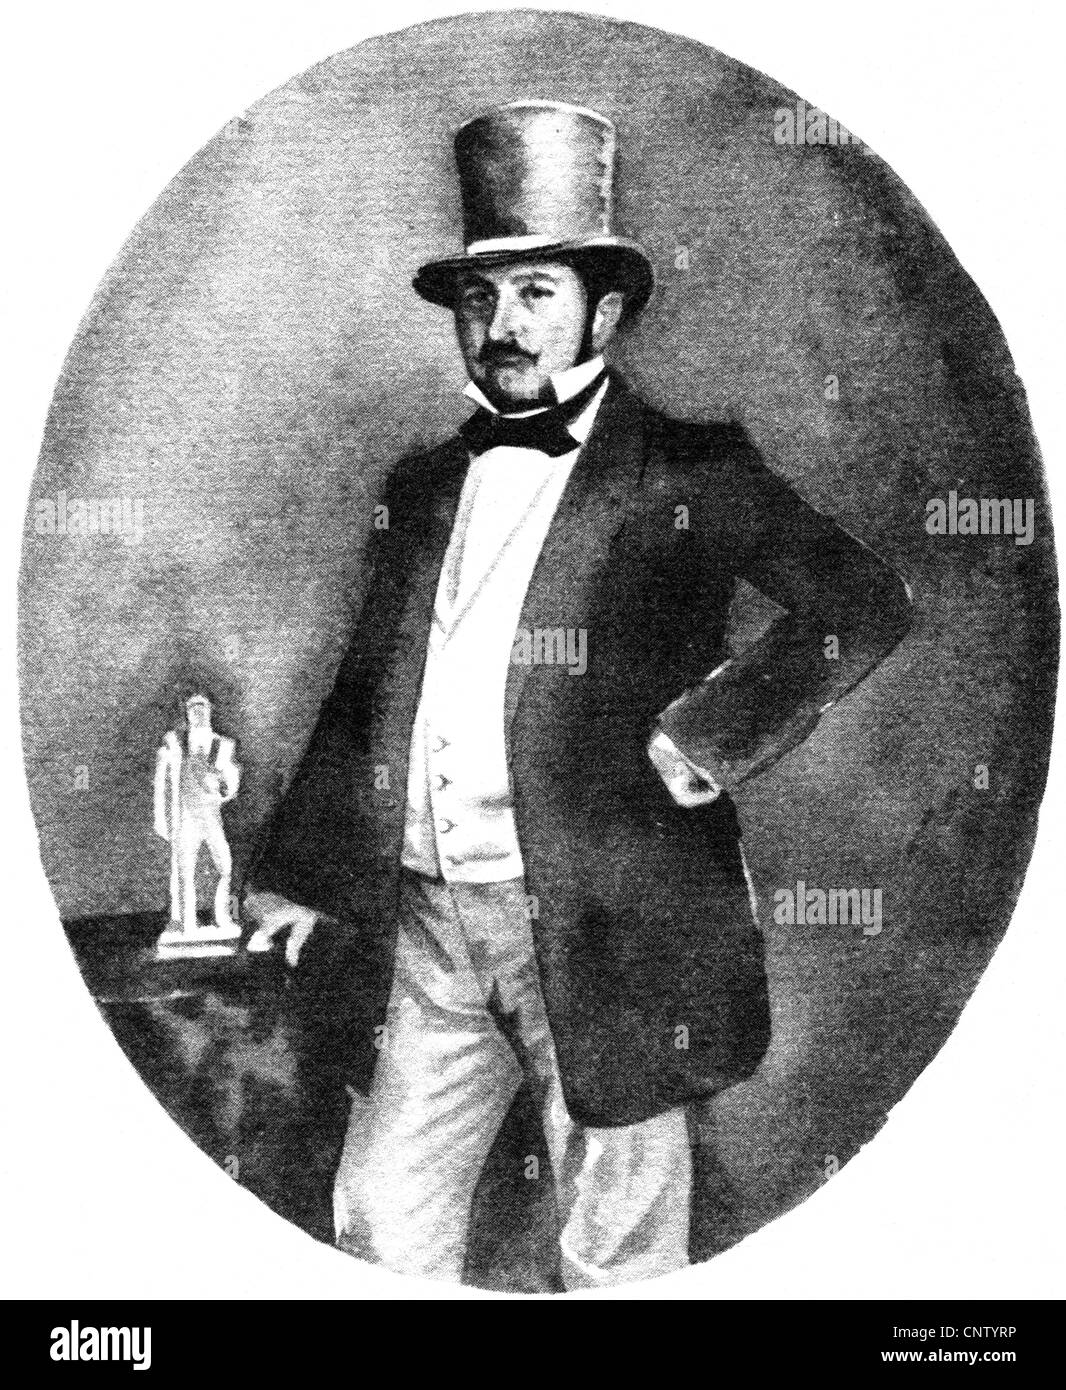 Litfass, Ernst, 11.2.1816 - 27.12.1874, German print shop owner and publisher, half length, 19th century, Stock Photo